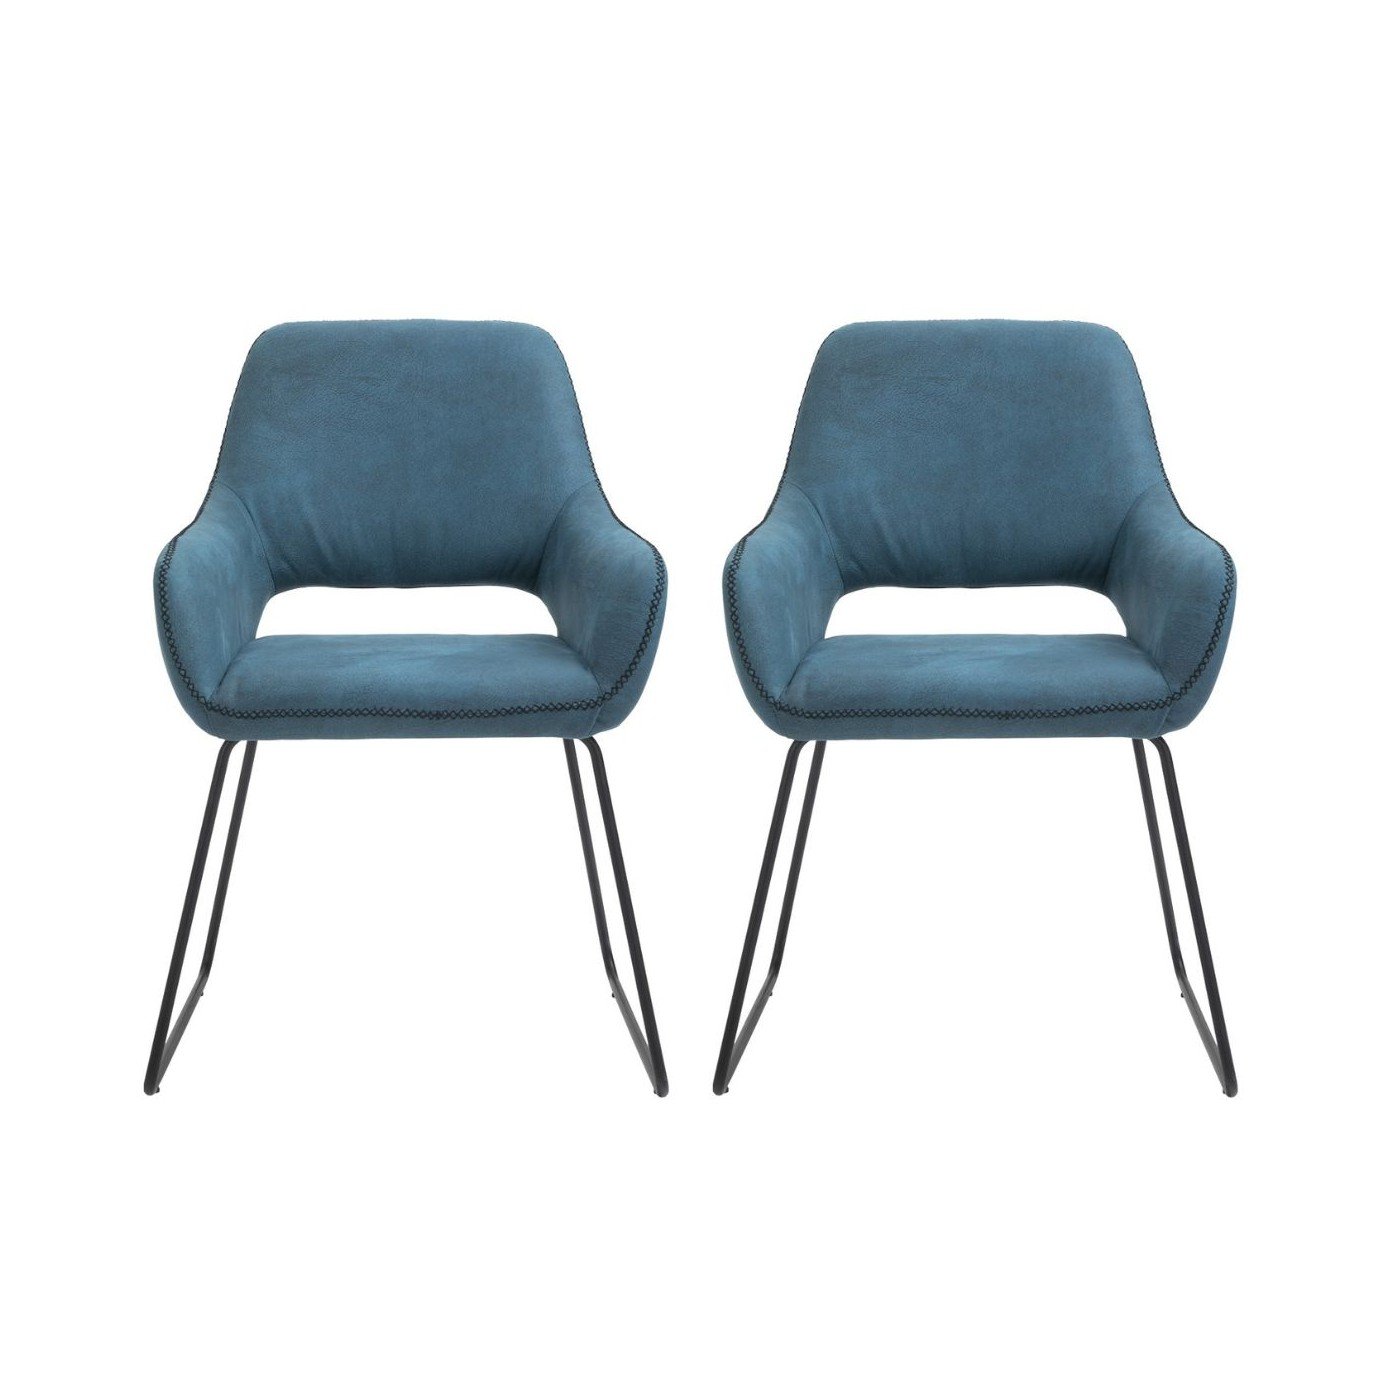 House Of Sander - Set of 2 Angel Chairs - Blue (101581)